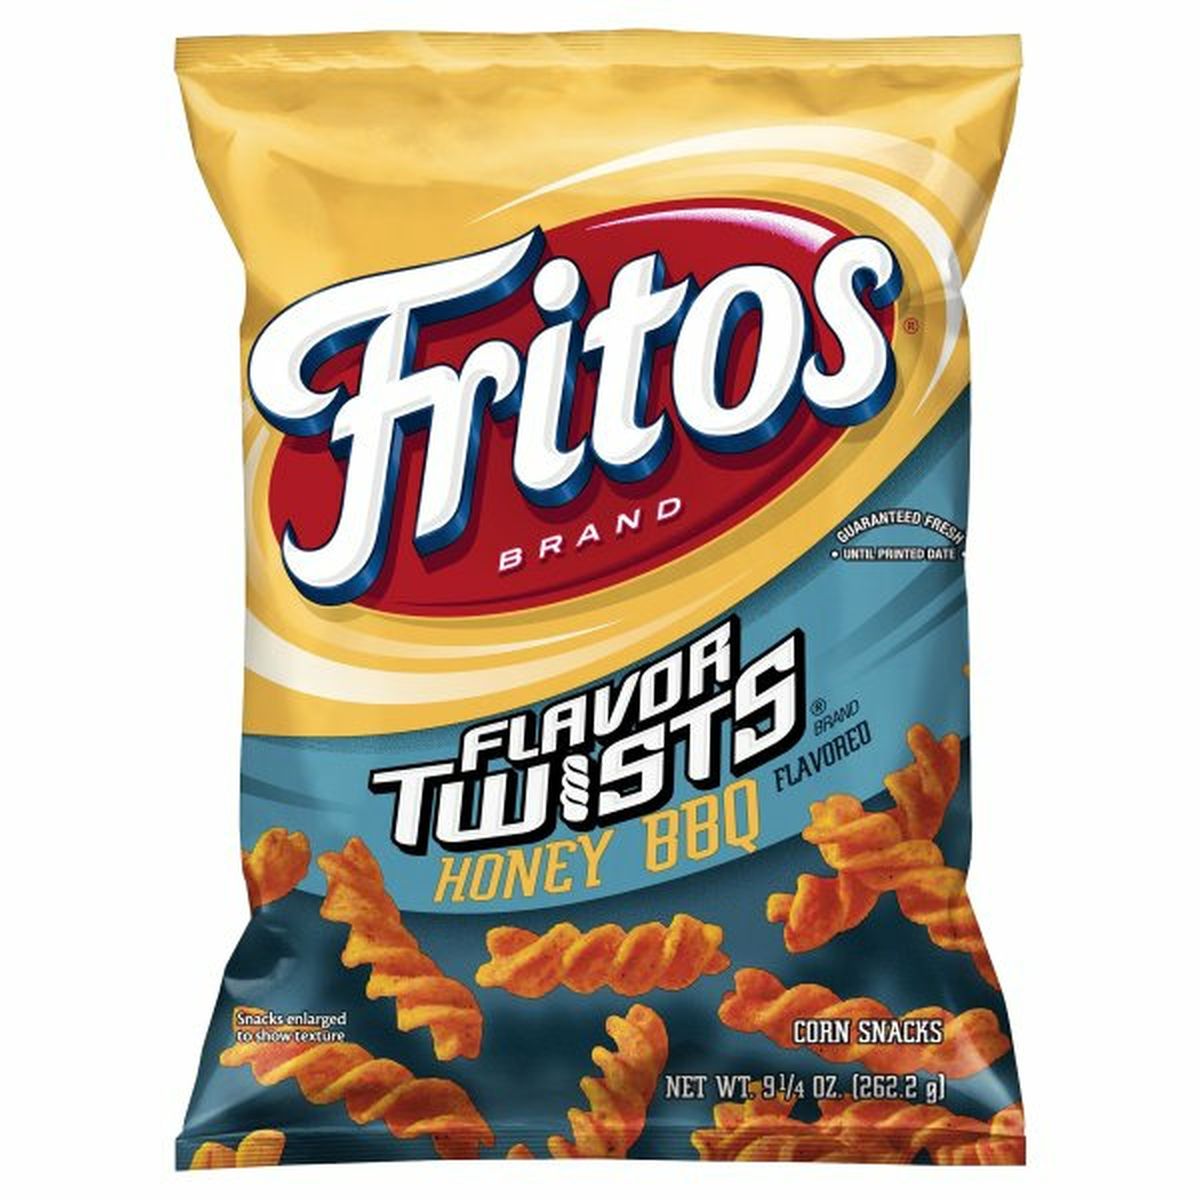 Calories in Fritos Twists Corn Snacks, Honey BBQ Flavored